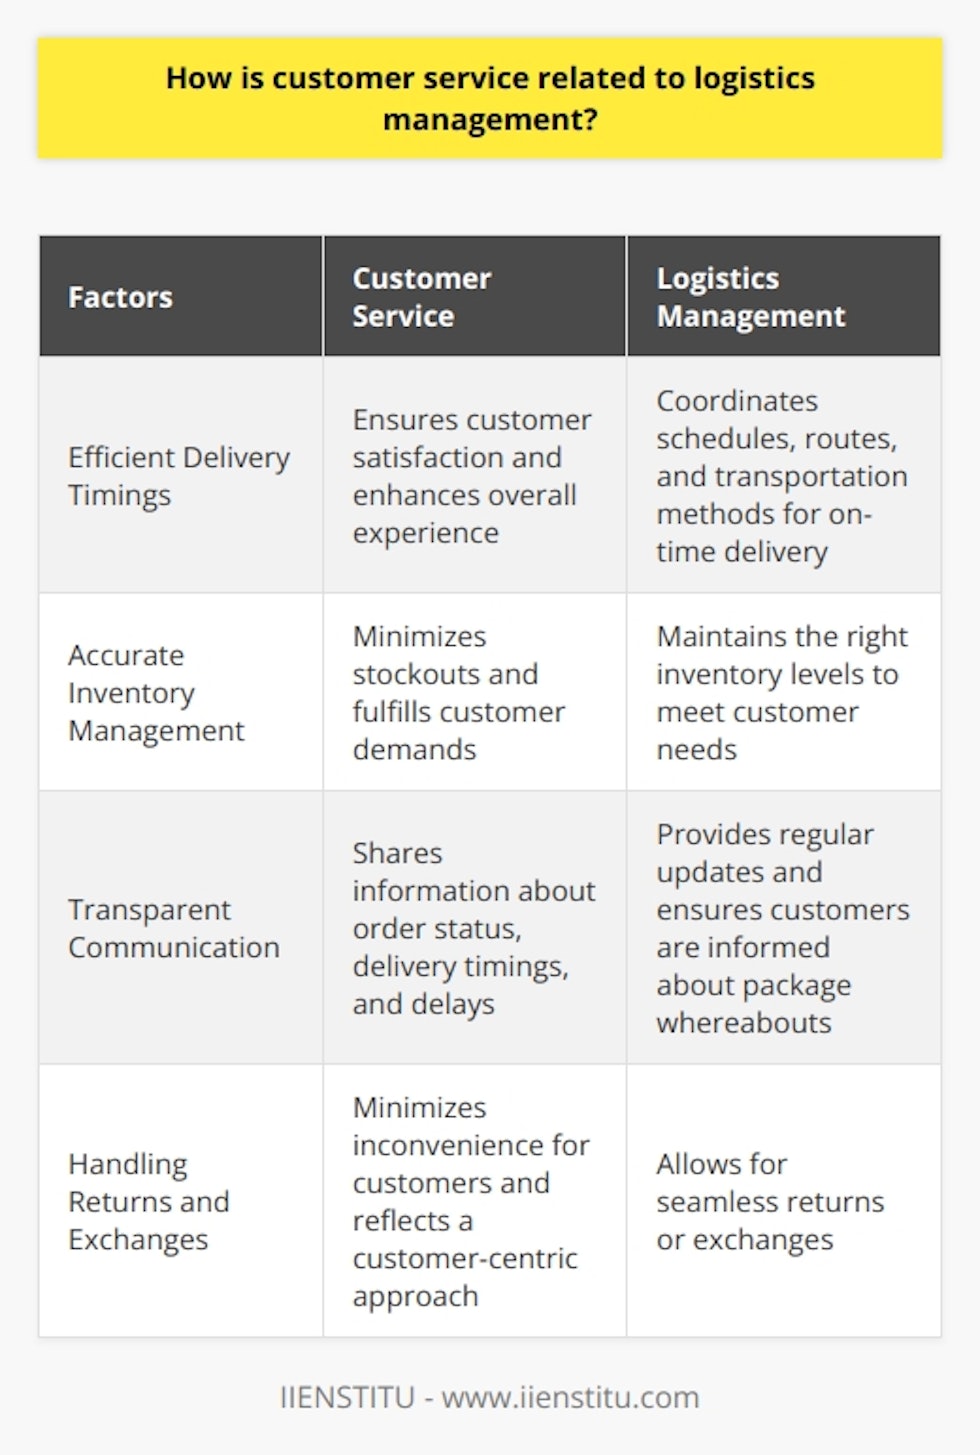 Customer service and logistics management are closely intertwined and play a significant role in providing a positive customer experience. Various factors connect these two fields, including efficient delivery timings, accurate inventory management, transparent communication, and handling returns and exchanges.Efficiency in delivery timings is a crucial aspect of logistics management. Timely delivery of products and services ensures customer satisfaction and enhances their overall experience. Logistics management coordinates schedules, routes, and transportation methods to guarantee the punctual arrival of goods, meeting customer expectations and increasing their satisfaction levels.Accurate inventory management is also essential in both customer service and logistics management. Maintaining the right inventory levels ensures that the right products are available to customers when they need them, minimizing stockouts, and fulfilling customer demands. Efficient inventory management avoids excessive storage costs and consistently meets customers' needs, resulting in a positive experience.Transparent communication is another critical factor connecting customer service and logistics management. Excellent customer service requires clear communication with customers, sharing information about the status of orders, delivery timings, and potential delays. Logistics management plays a vital role in providing this transparency, ensuring customers are informed about the whereabouts of their packages. Regular updates and proactive responses to customer queries foster trust and loyalty.Handling returns and exchanges is an area where customer service and logistics management intersect. Efficient logistics processes should allow for seamless returns or exchanges, minimizing inconvenience for customers. A smooth returns process reflects a customer-centric approach and encourages customers to continue their patronage.In conclusion, customer service and logistics management are deeply connected through different factors such as efficient delivery, accurate inventory management, transparent communication, and smooth returns processes. By carefully planning and executing logistics management functions, businesses can enhance customer satisfaction, build long-lasting relationships, and ultimately achieve success.